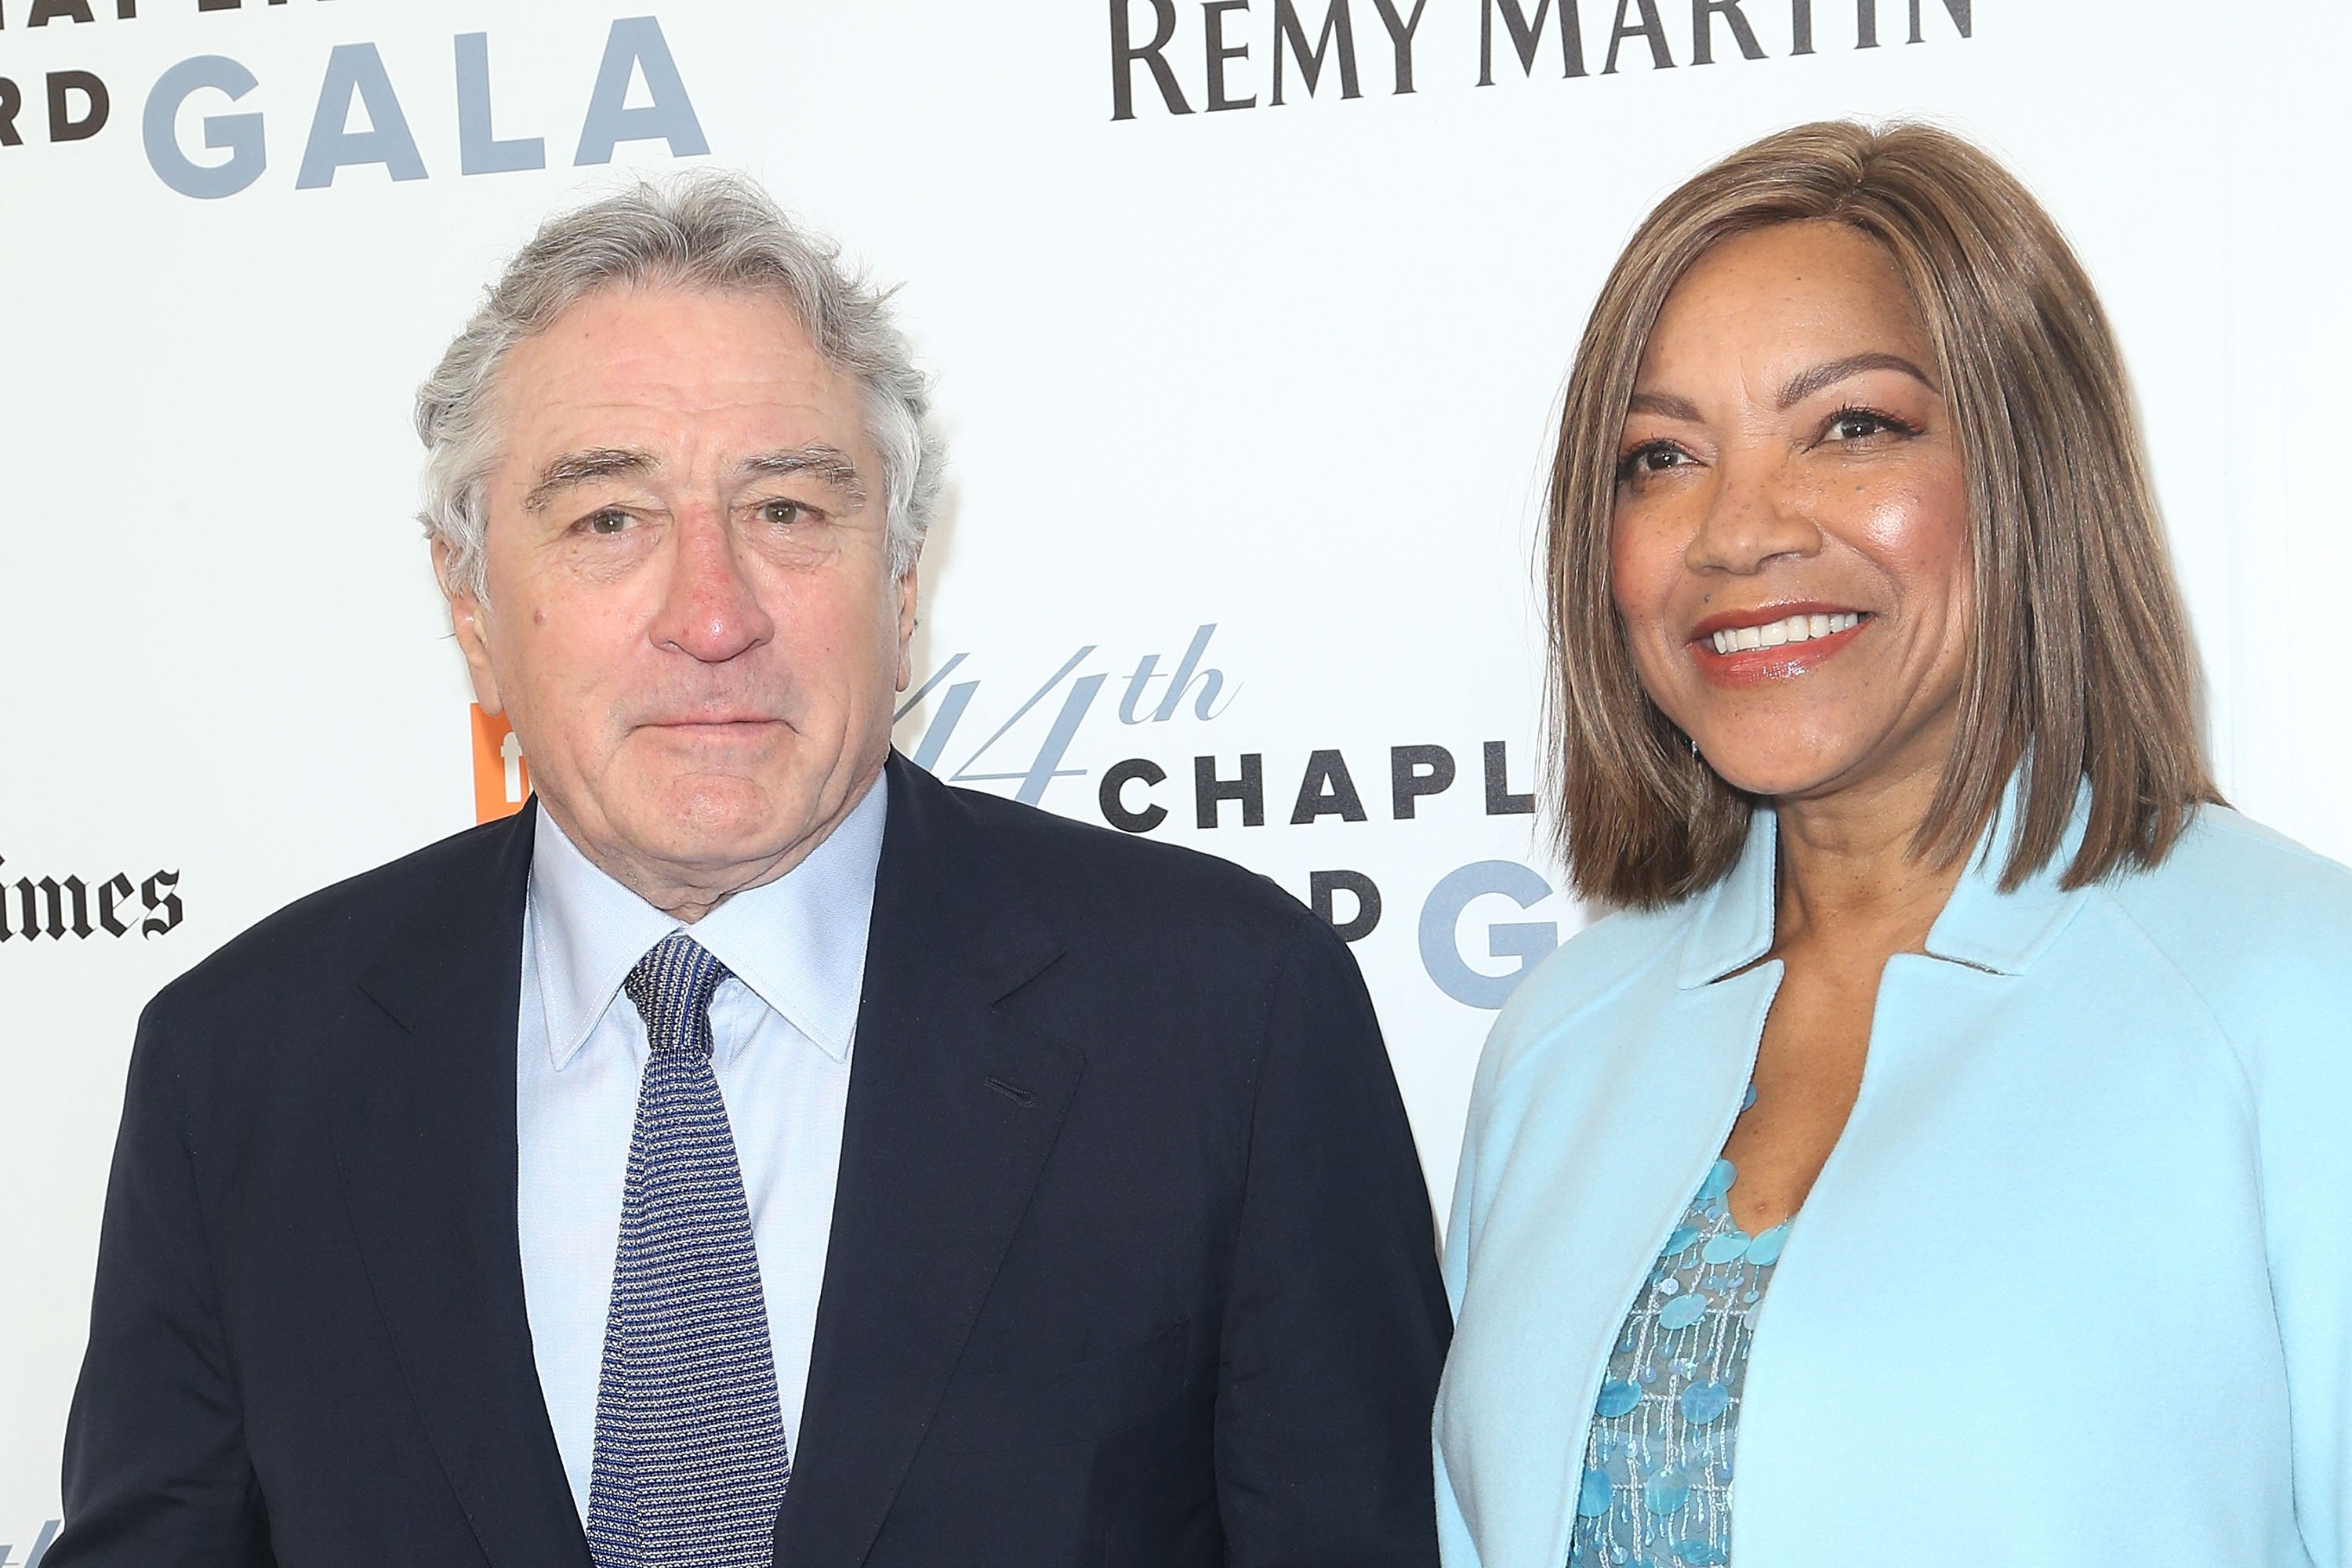 Robert De Niro and Grace Hightower attending the 44th Chaplin Award Gala at David Koch Theatre Lincoln Center on May 8, 2017 in New York City. / Source: Getty Images